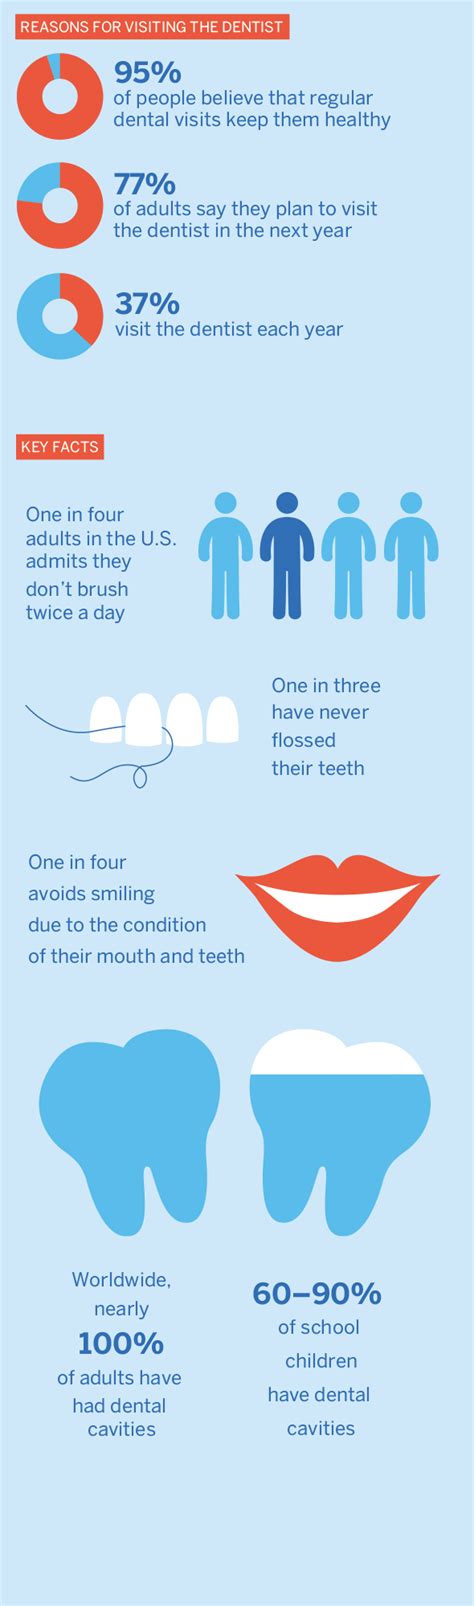 dentistry s greatest challenges in nine infographics scientific american